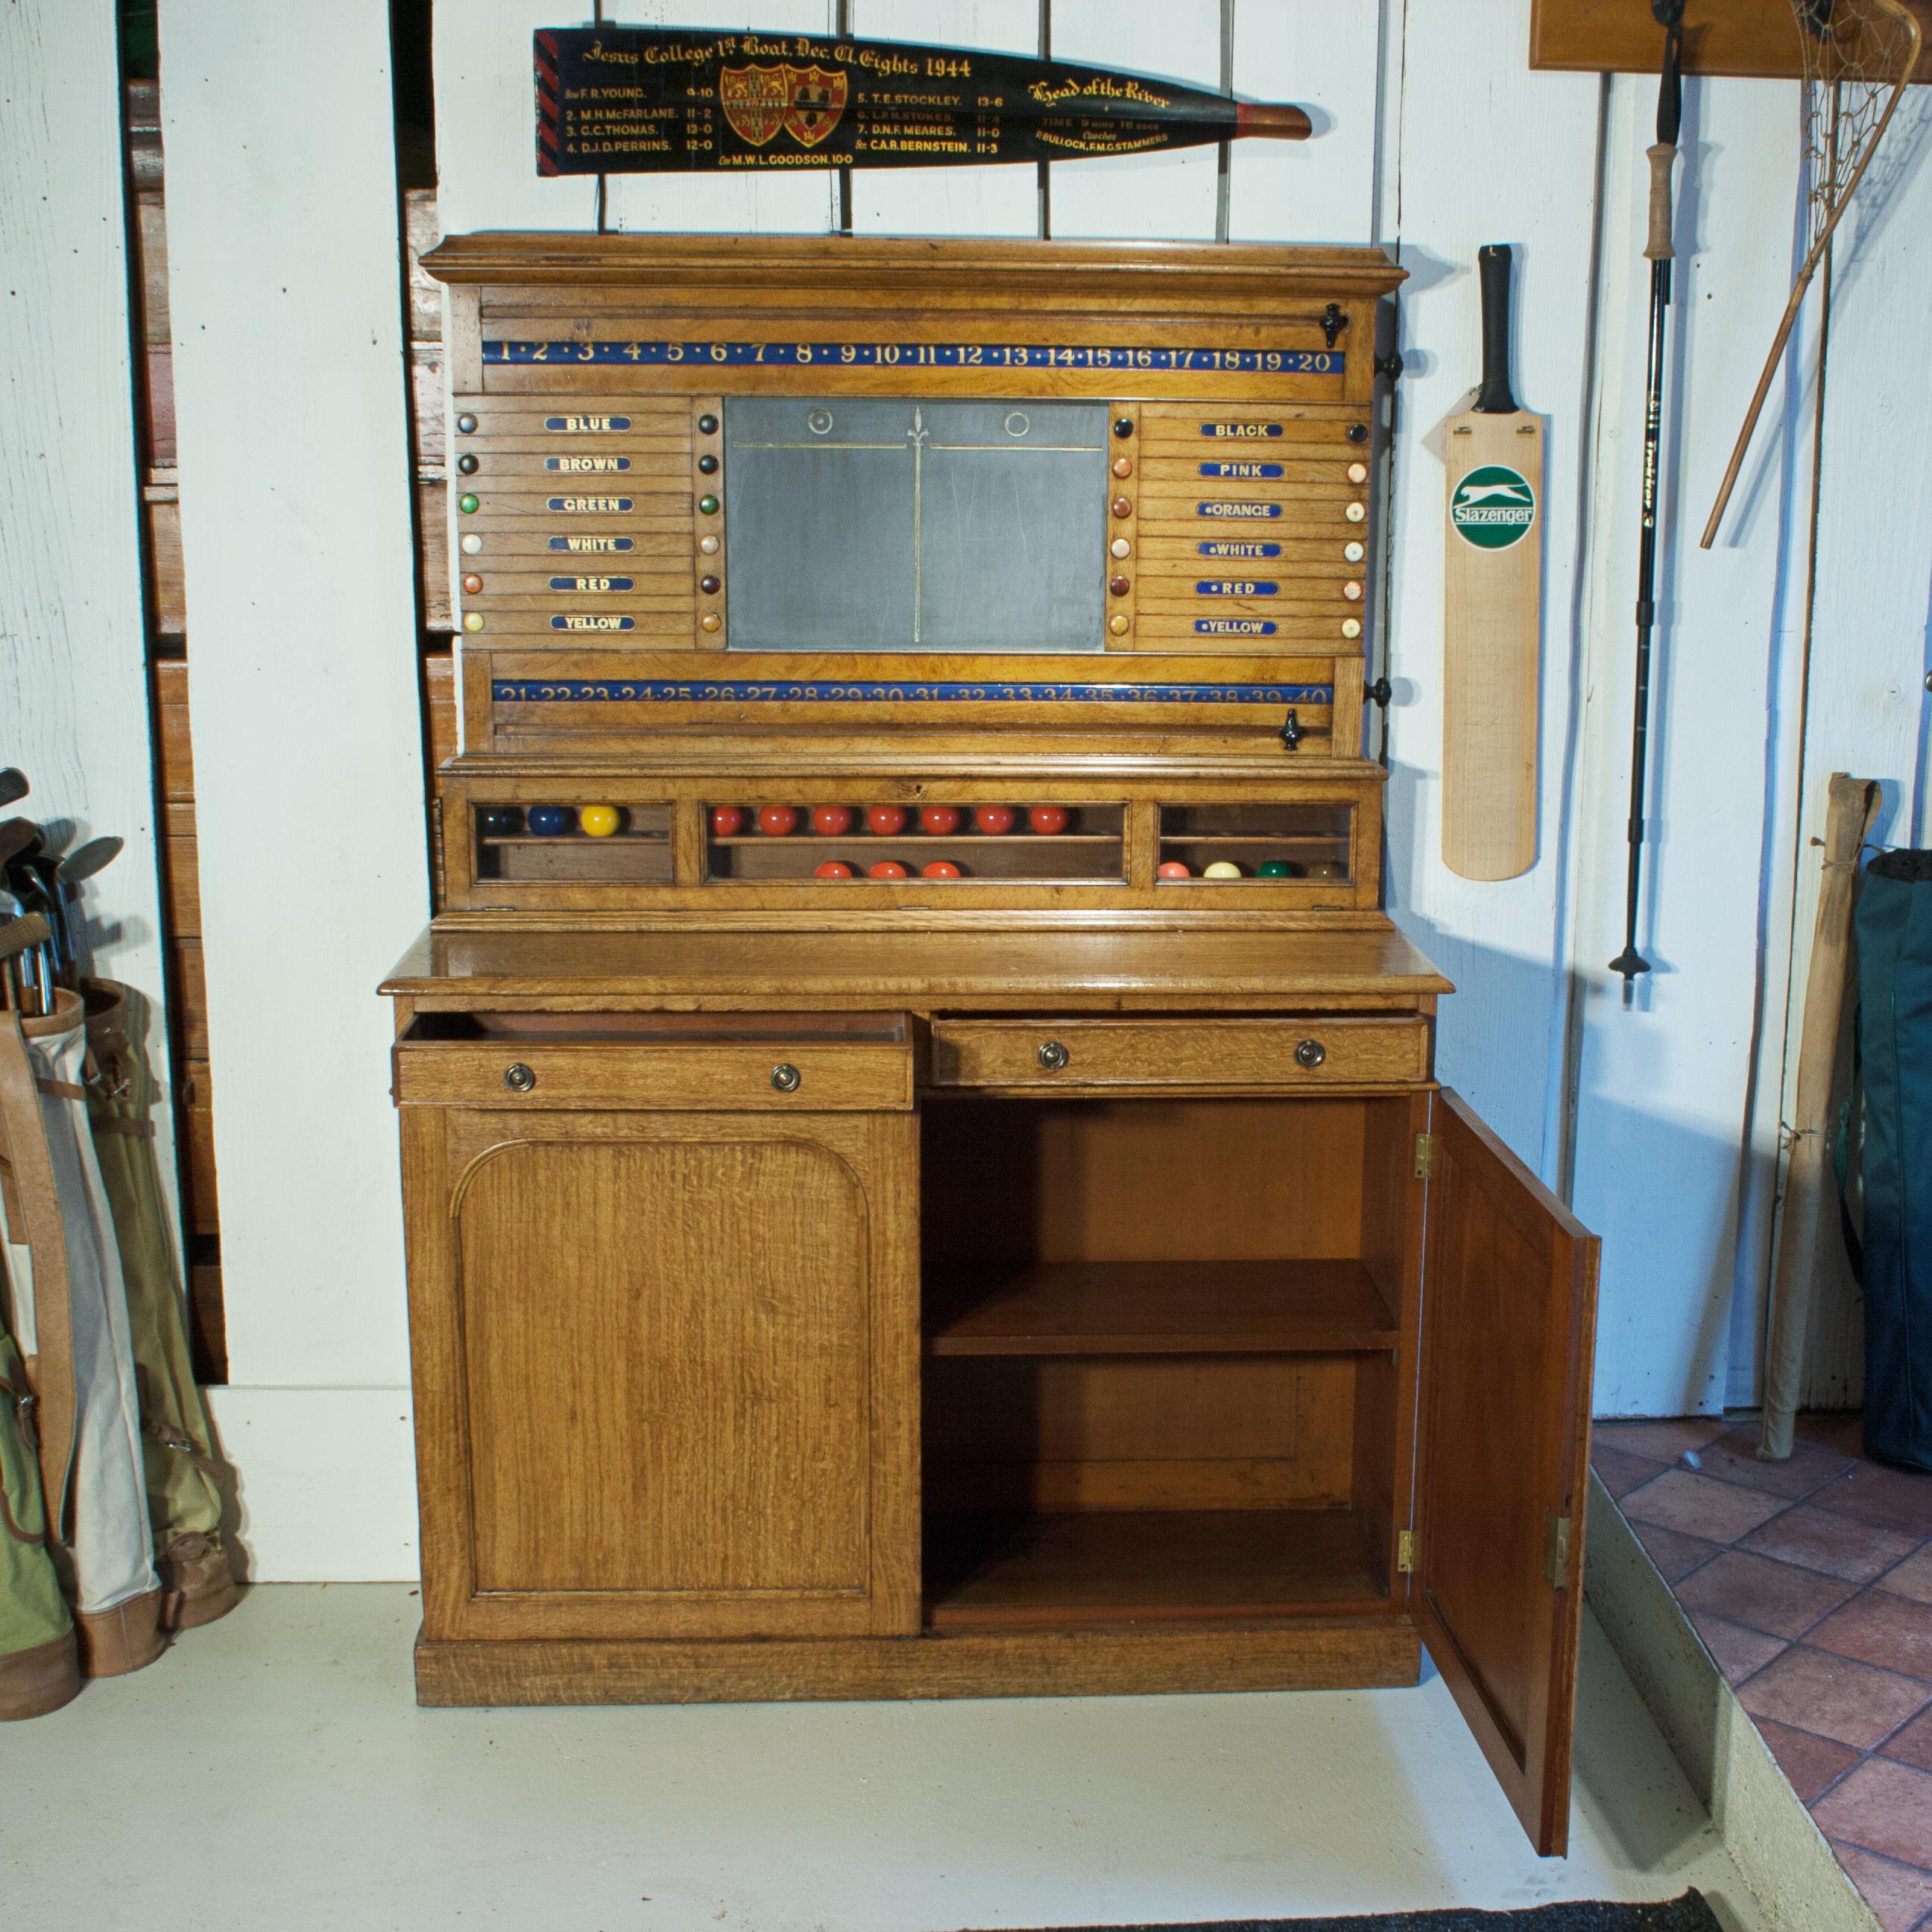 Snooker, Billiards & Life pool scoreboard attributed to Thurston & Co.
A nice combined Victorian billiards and life pool scoreboard made of light oak. The billiard scorer sits upon a lockable ball cabinet that can house 32 balls, which then sits